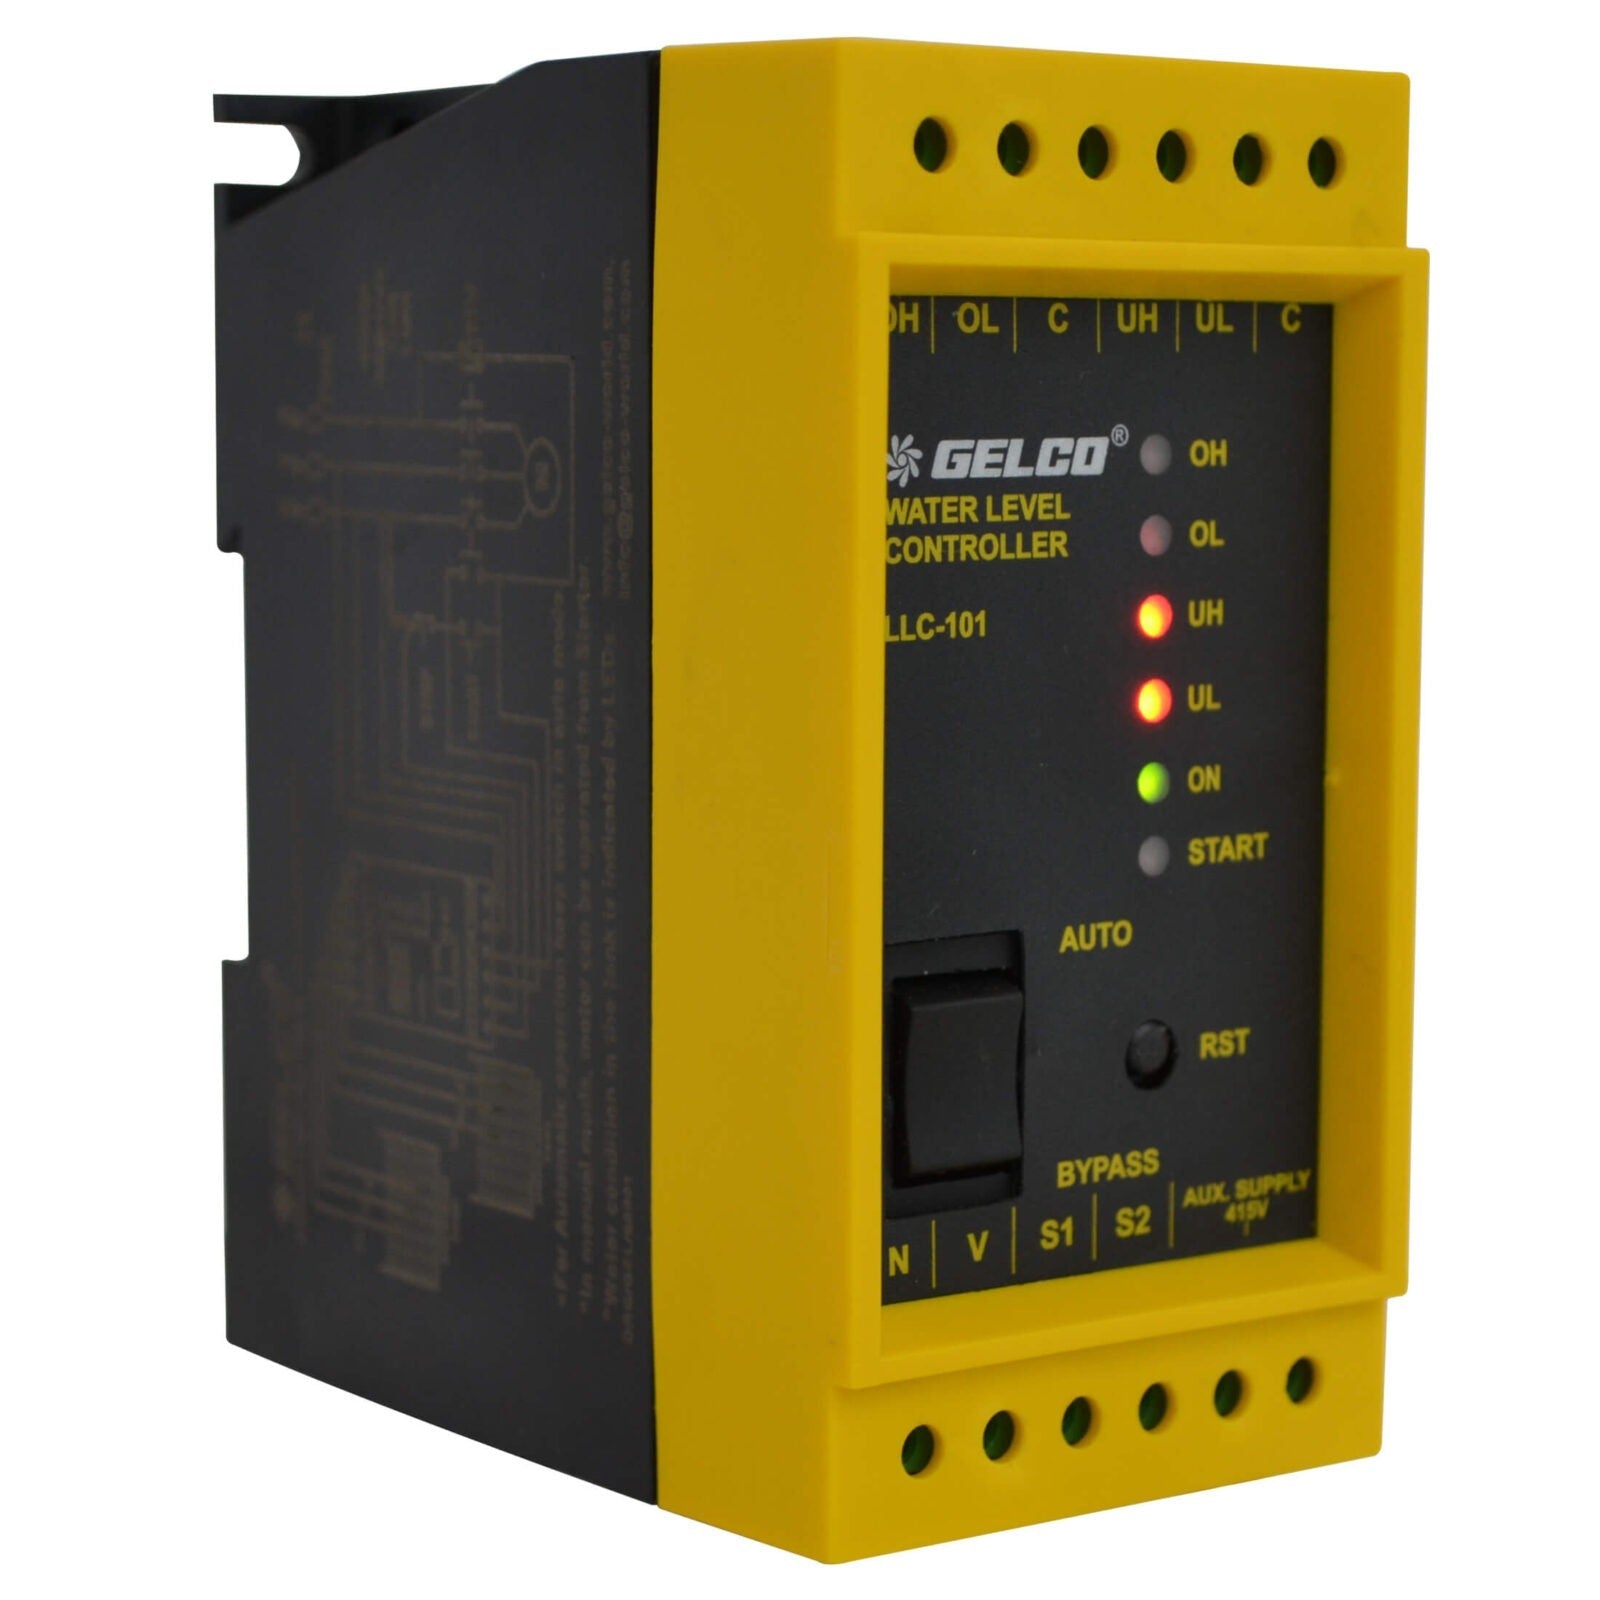 Gelco Water Level Controller, Automatically Operate The Monoblock Motor, 6 Amp Load Capacity, LLC 101 - Gelco Electronics Pvt. Ltd.